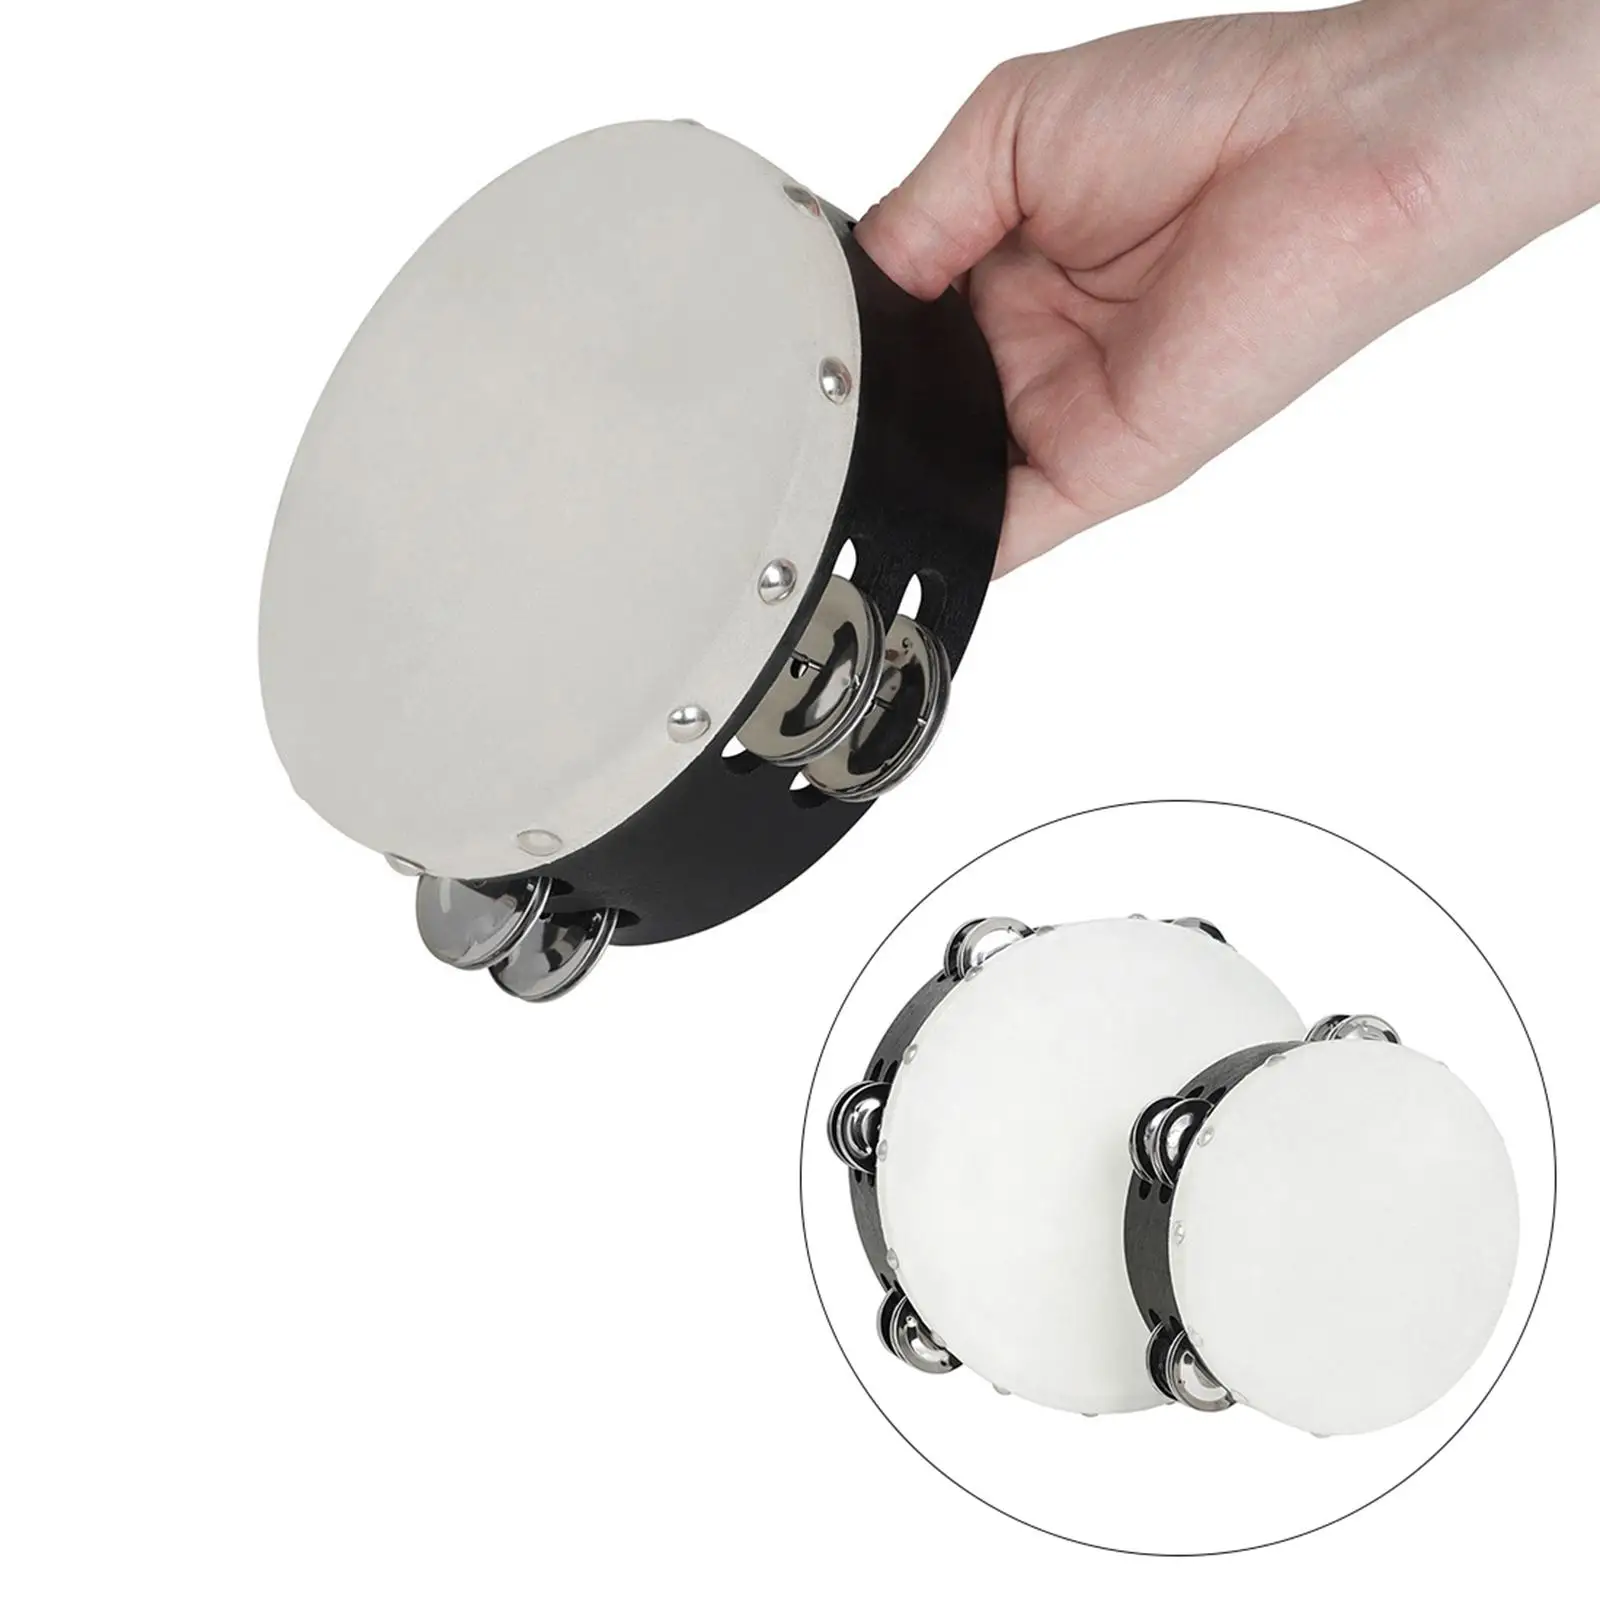 2Pcs Double Tambourines Hand Held Drum Hand Percussion Manual Wooden Tambourine for Games Projects Adults Party Church